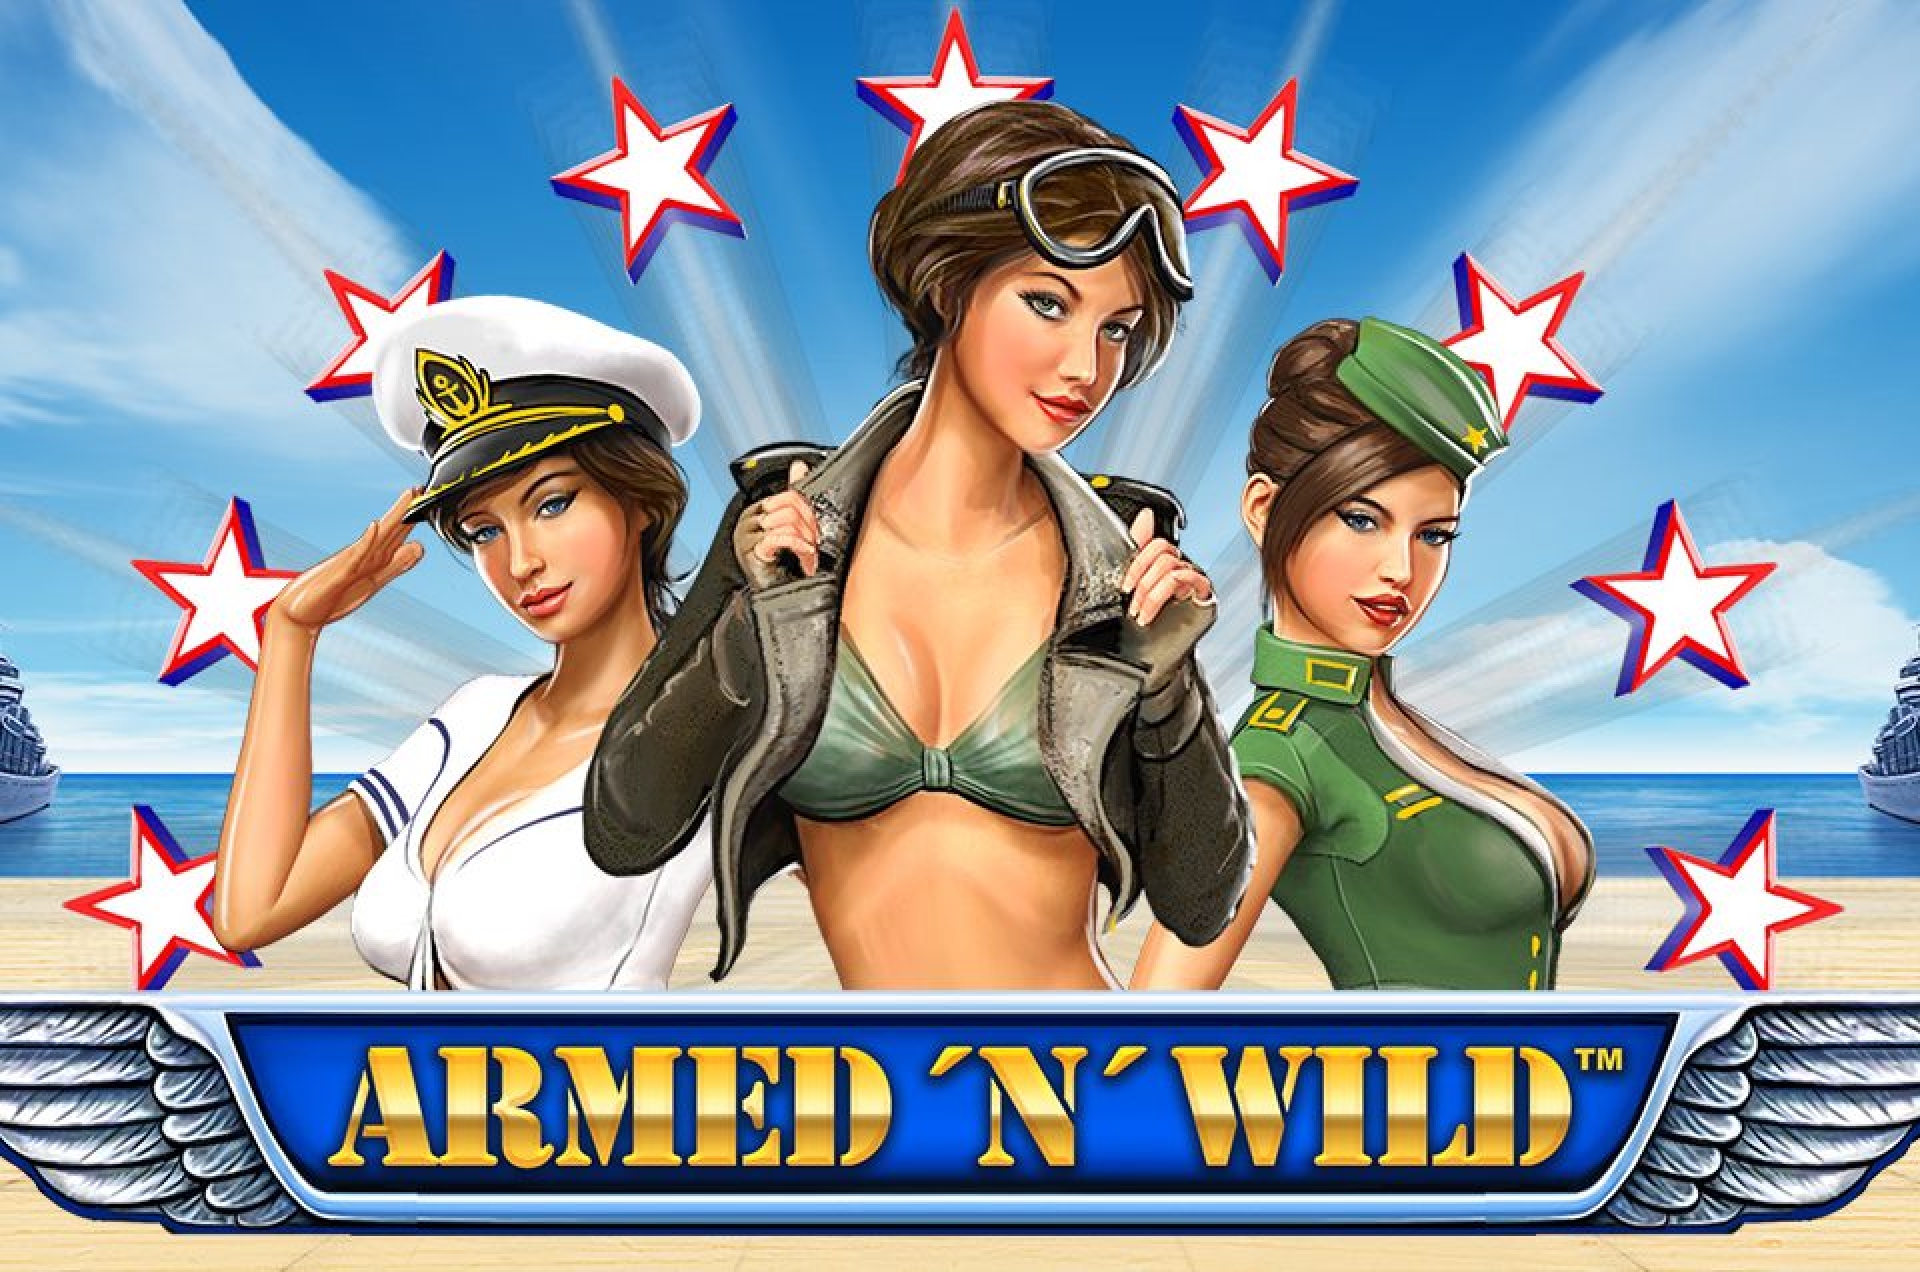 The Armed 'N' Wild Online Slot Demo Game by Synot Games